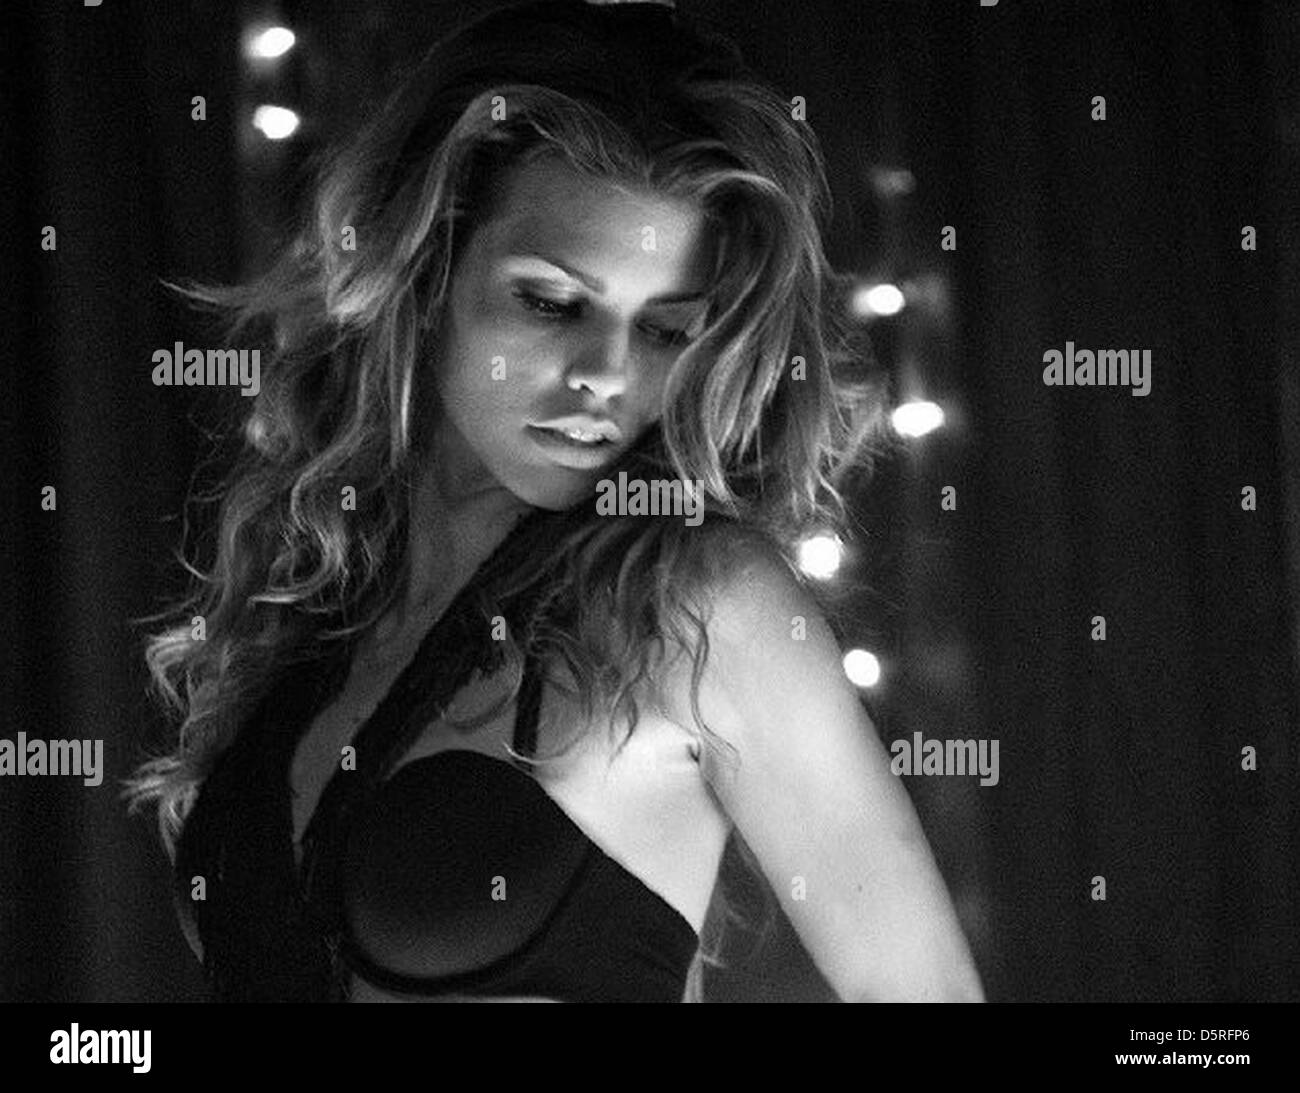 OFFICER DOWN  2013 Anchor Bay film with AnnaLynne McCord (correct spelling) Stock Photo